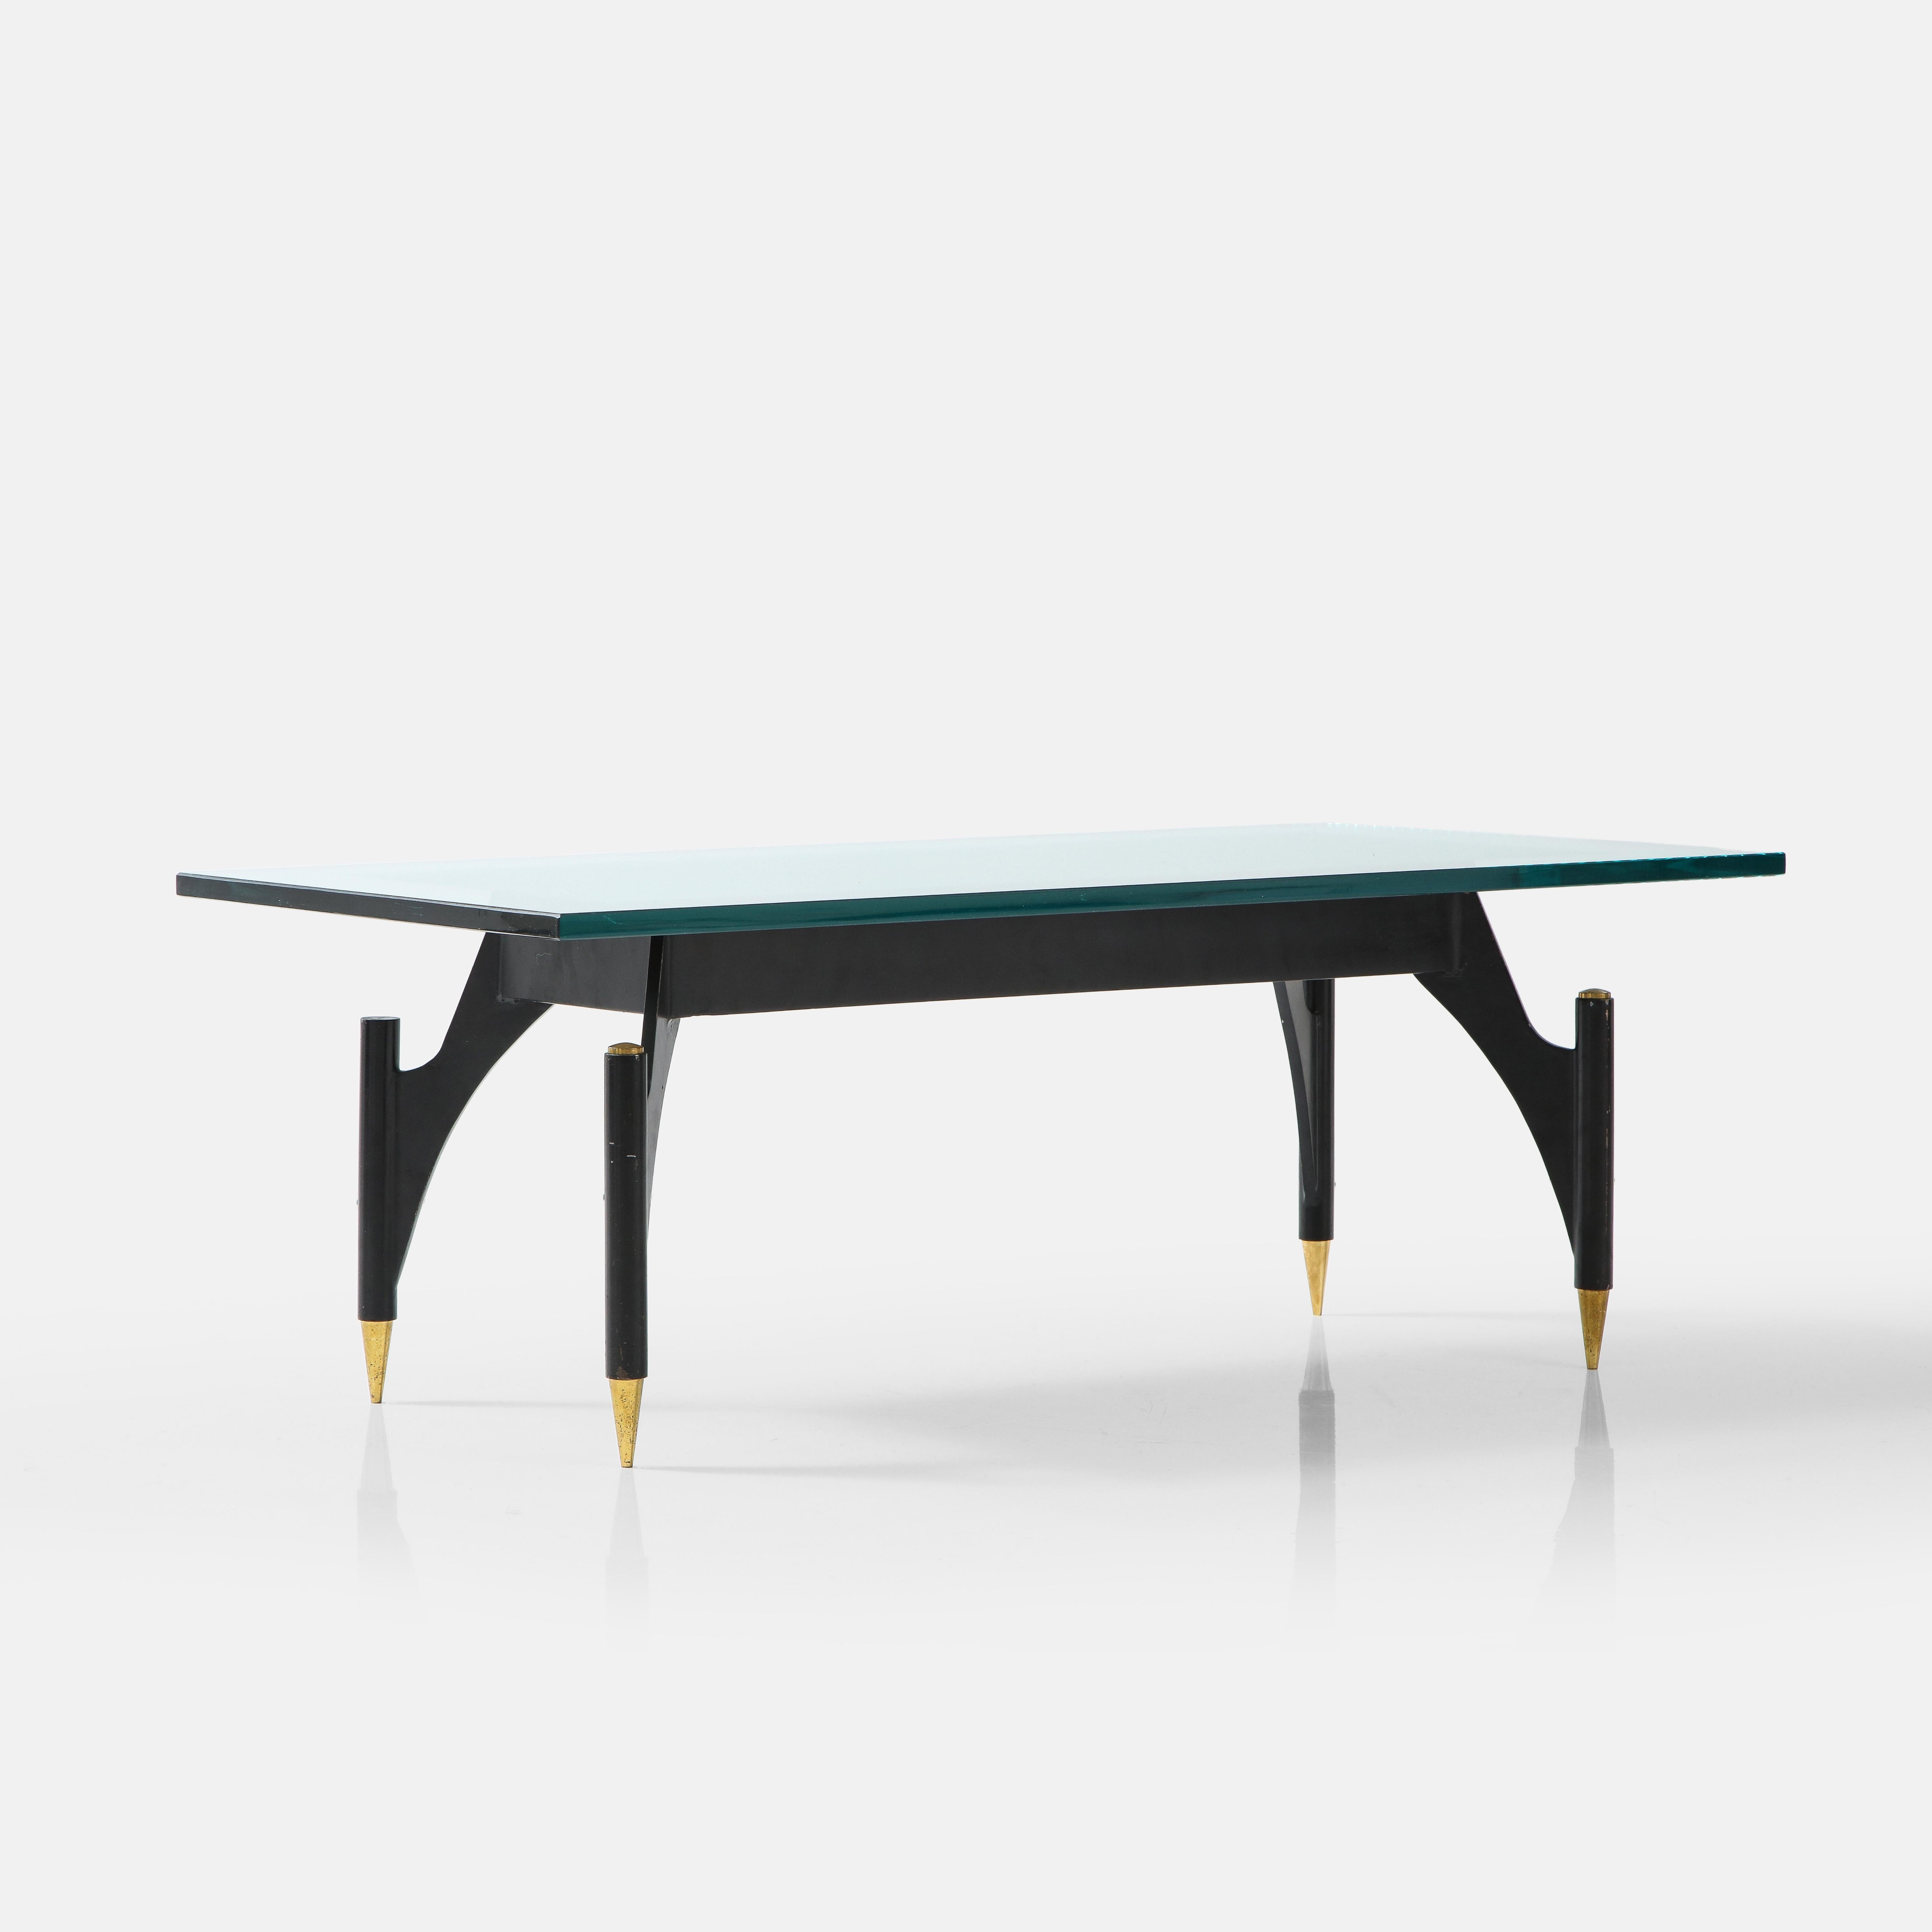 Painted Max Ingrand for Fontana Arte Rare Modernist Coffee Table Model 2013, 1960s For Sale